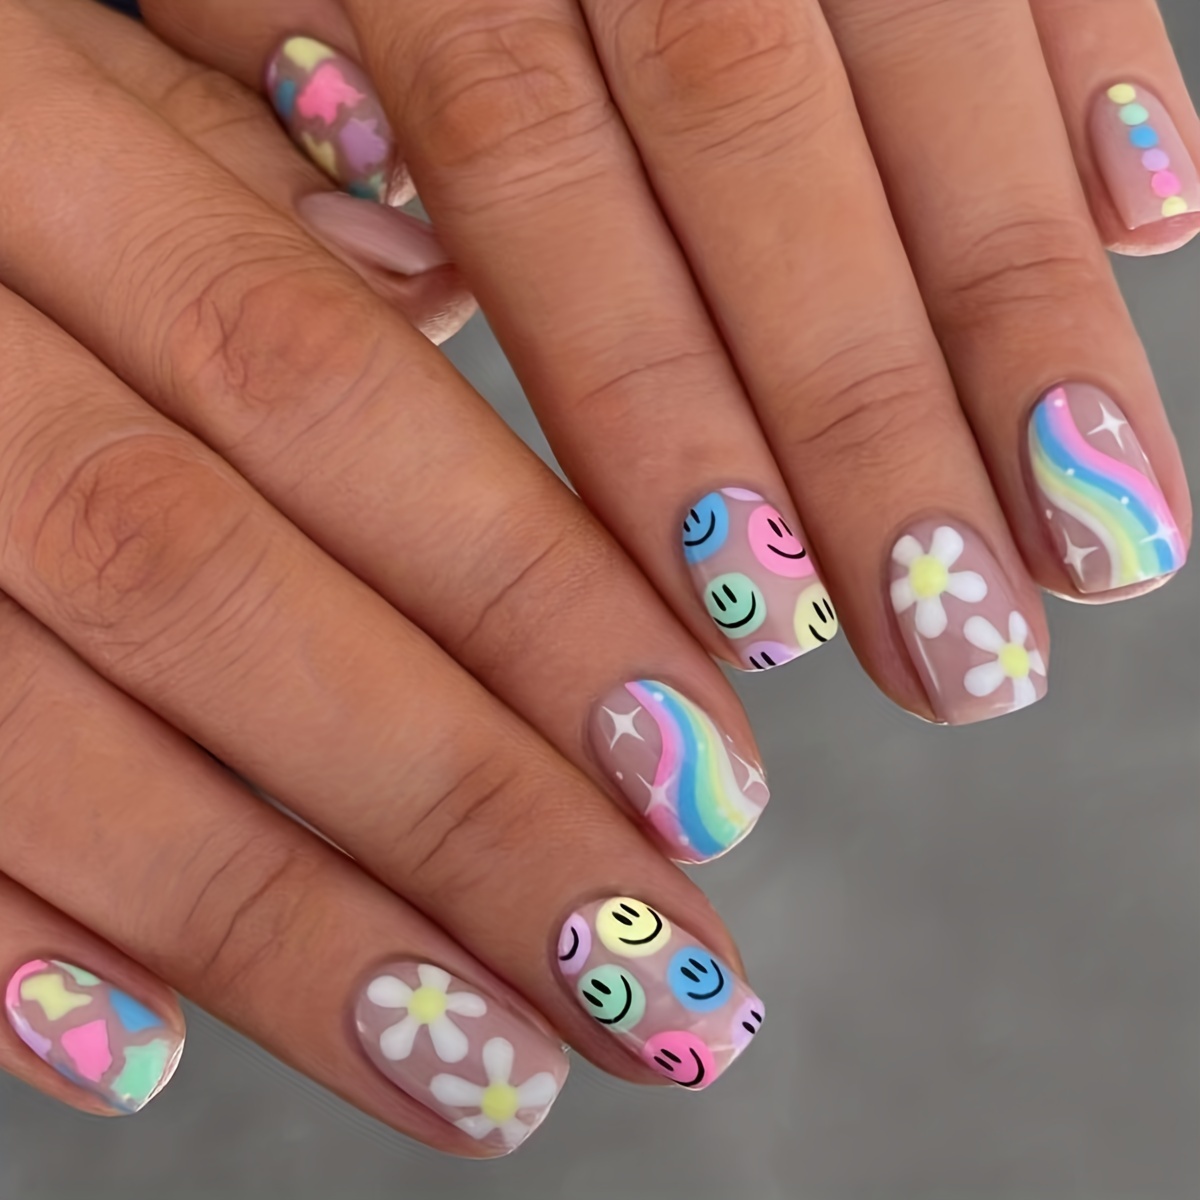 A Complete Guide: 5 Cute and Colorful Fake Nails for Kids